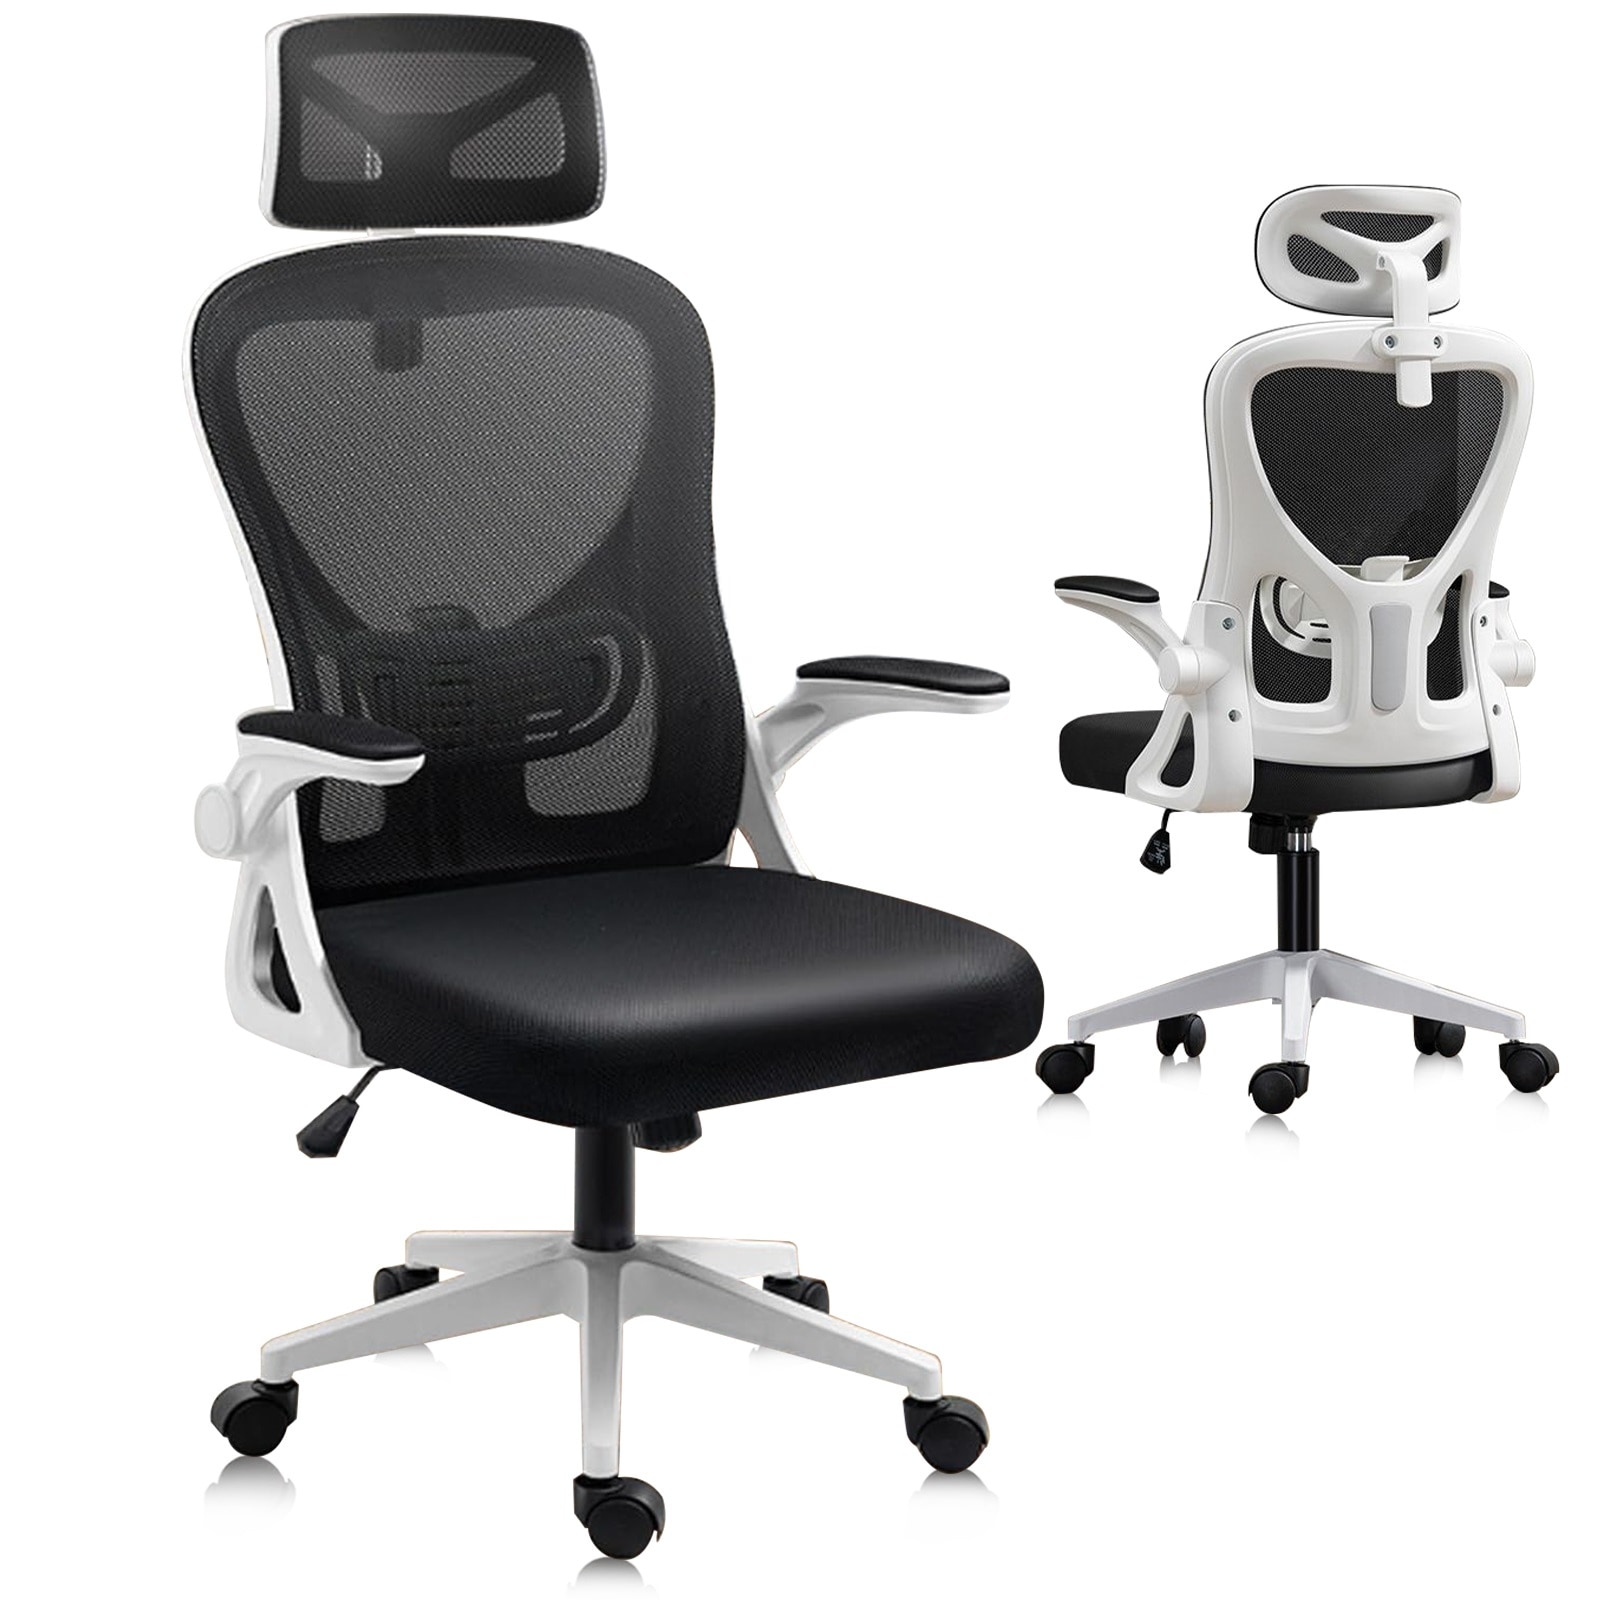 https://ak1.ostkcdn.com/images/products/is/images/direct/f251e0dd175f8963e10f9856897127eab927bb1a/Office-Chair%2C-Ergonomic-Desk-Chair%2C-High-Back-Faux-Leather-Task-Chairs-for-Home-Office-for-Adult-Working-Study.jpg